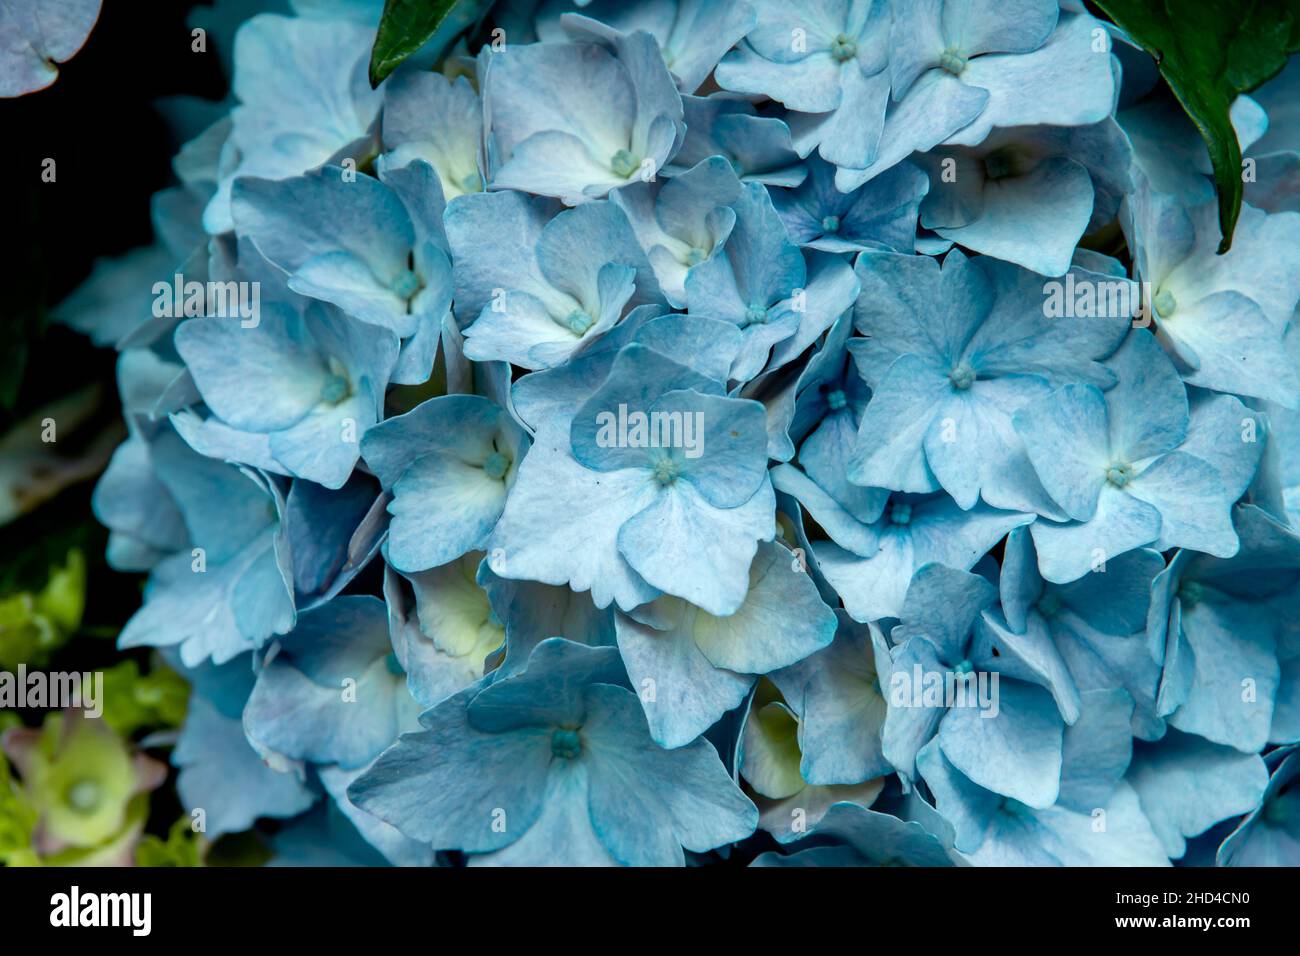 Pale blue hydrangea macrophylla or hortensia flowers close up Stock Photo